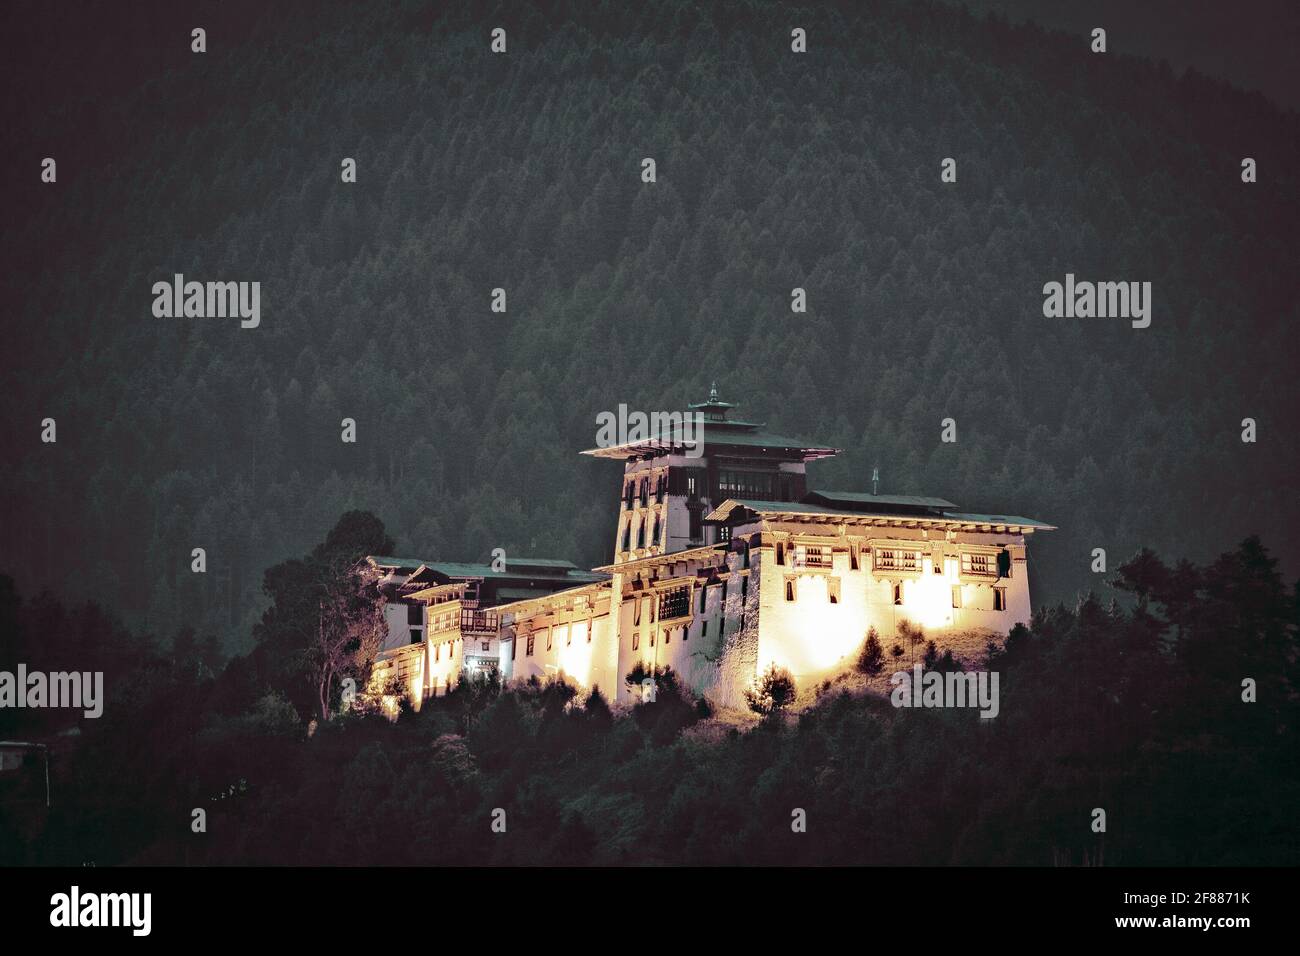 Jakar Dzong or Jakar Yugyal Dzong is the dzong or fortress of the Bumthang District in central Bhutan that was completed in 1667. Stock Photo